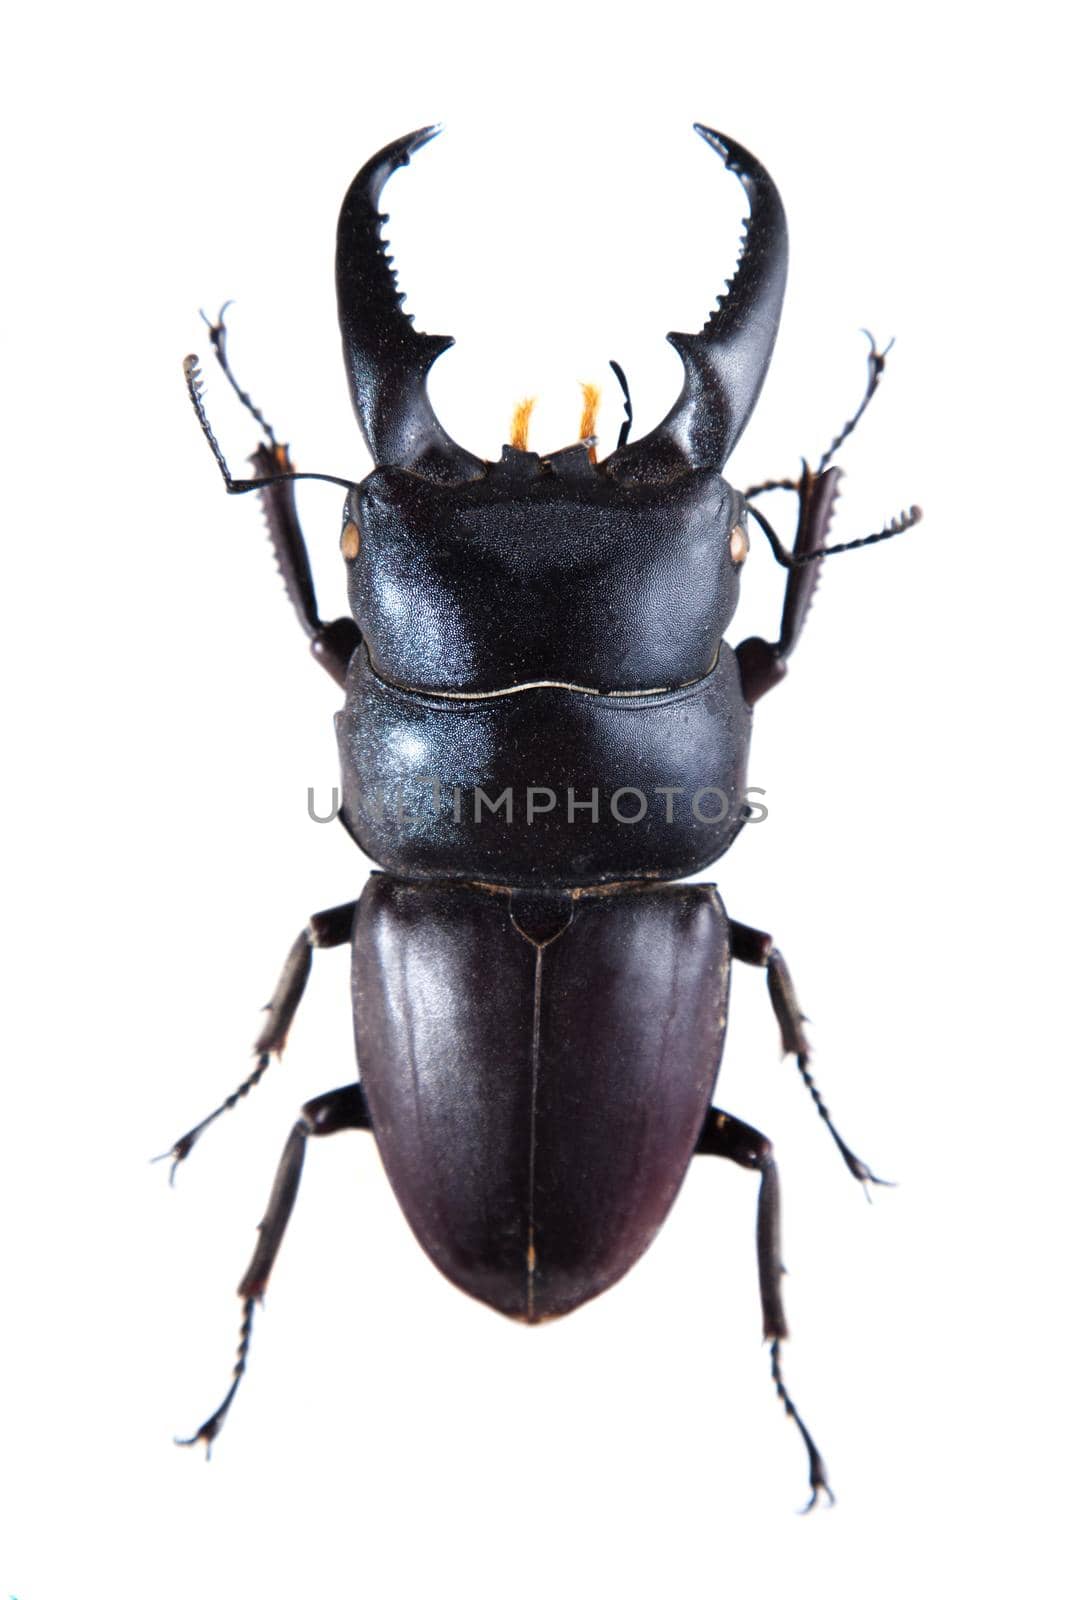 Stag beetle in museum isolated on the white background